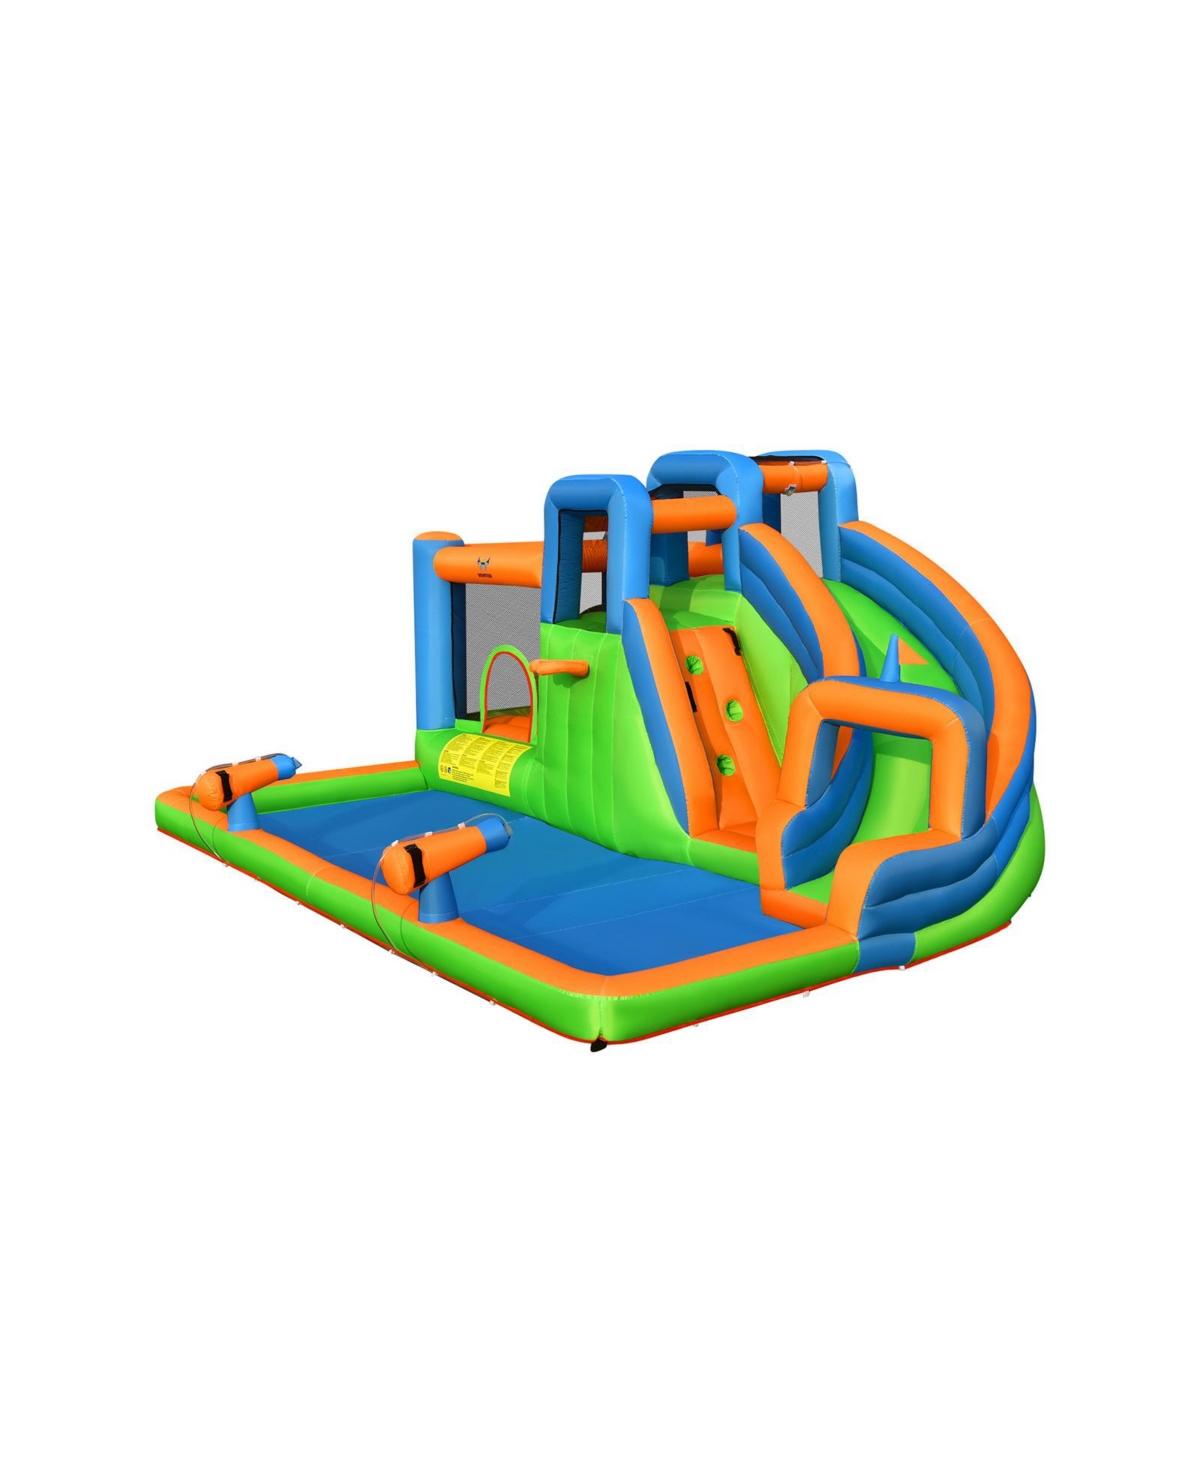 Inflatable Water Slide with Dual Climbing Walls and Blower Excluded - Open Miscellaneous